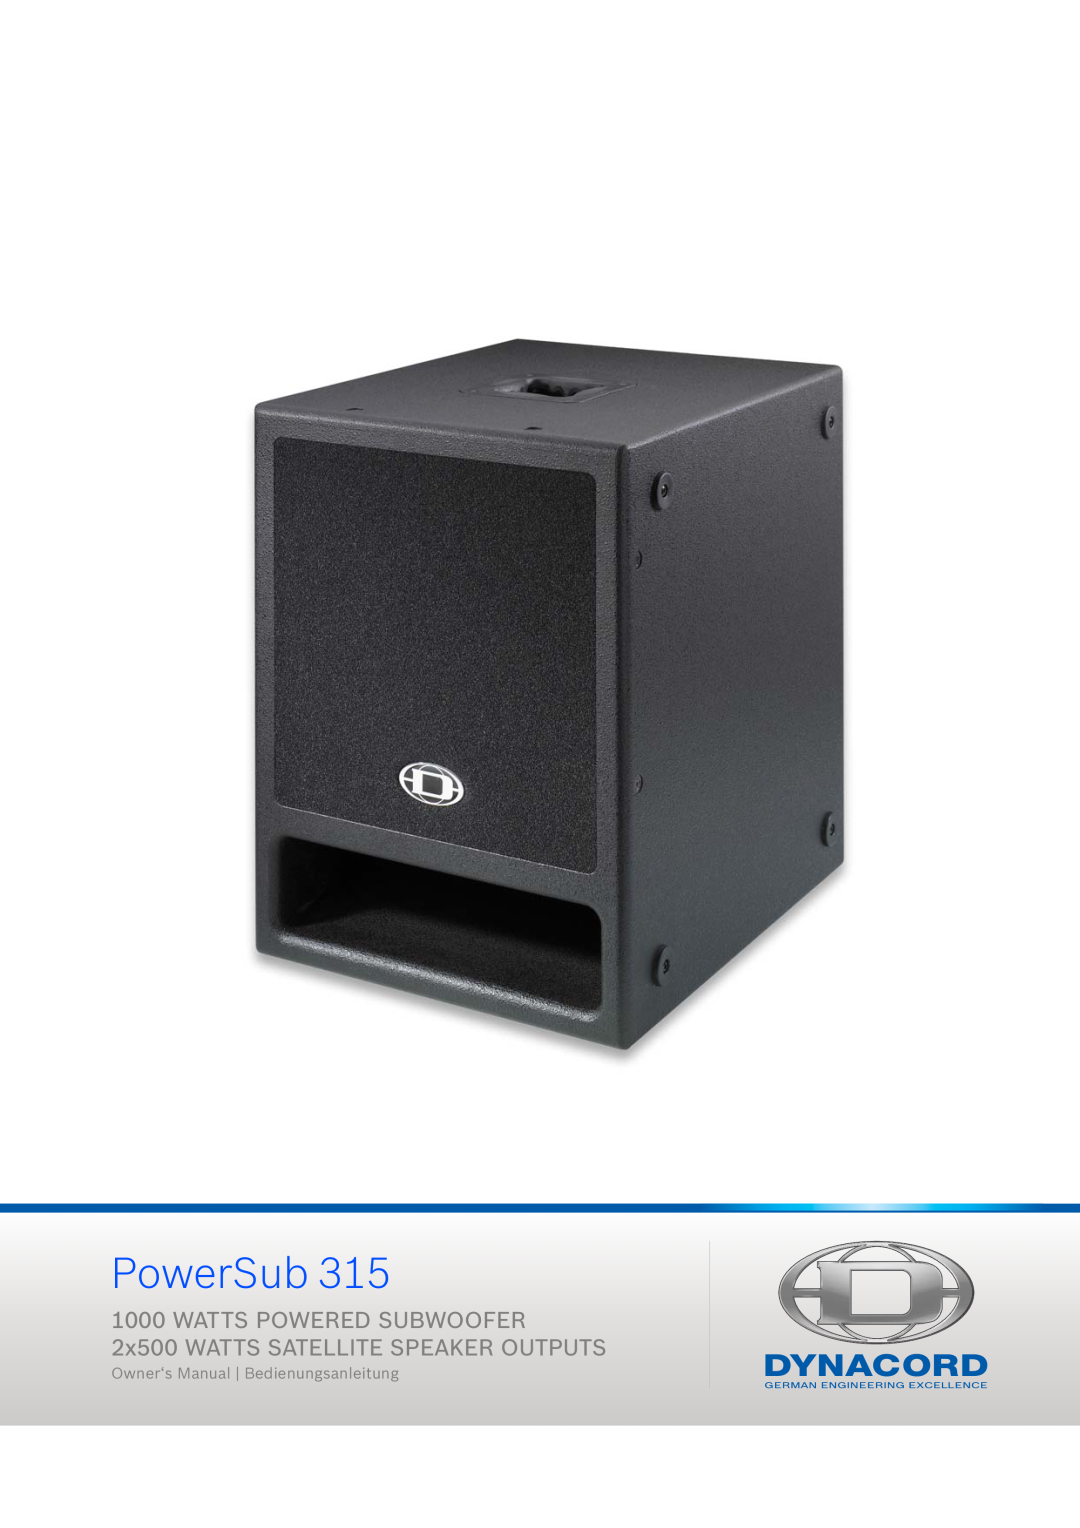 Dynacord 315 owner manual PowerSub, Watts Powered Subwoofer, 2x500 WATTS SATELLITE SPEAKER OUTPUTS 